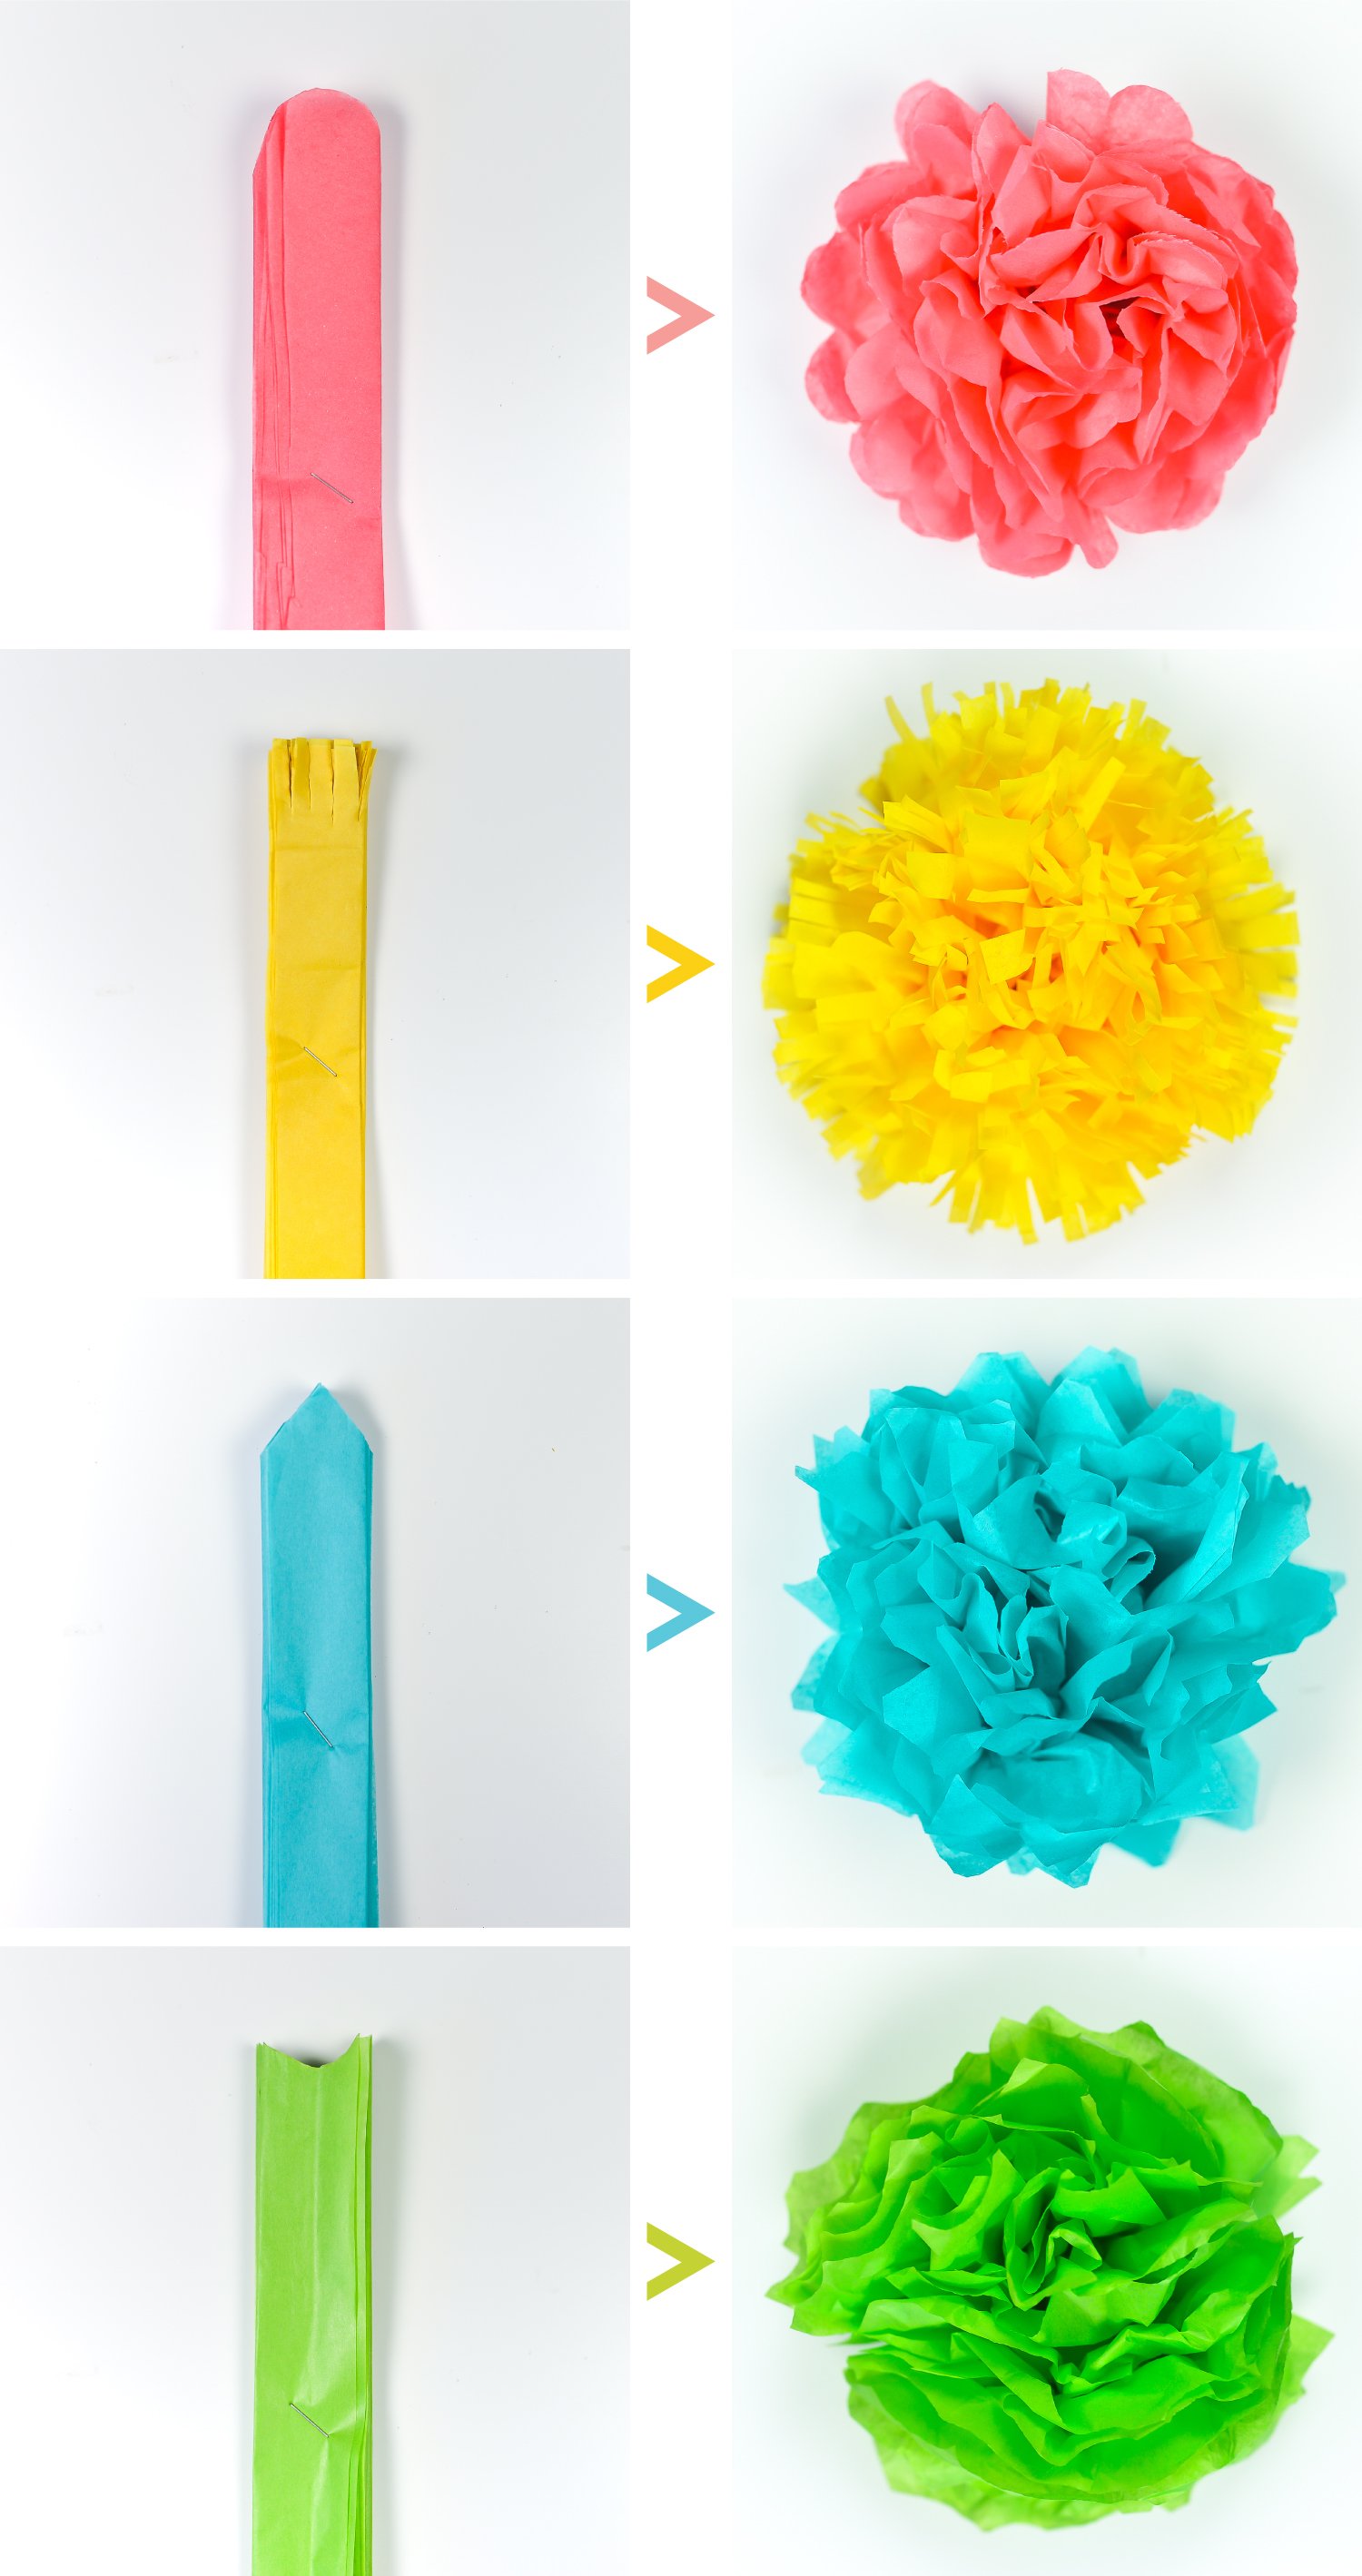 Tissue paper flowers four ways by cutting the edges differently